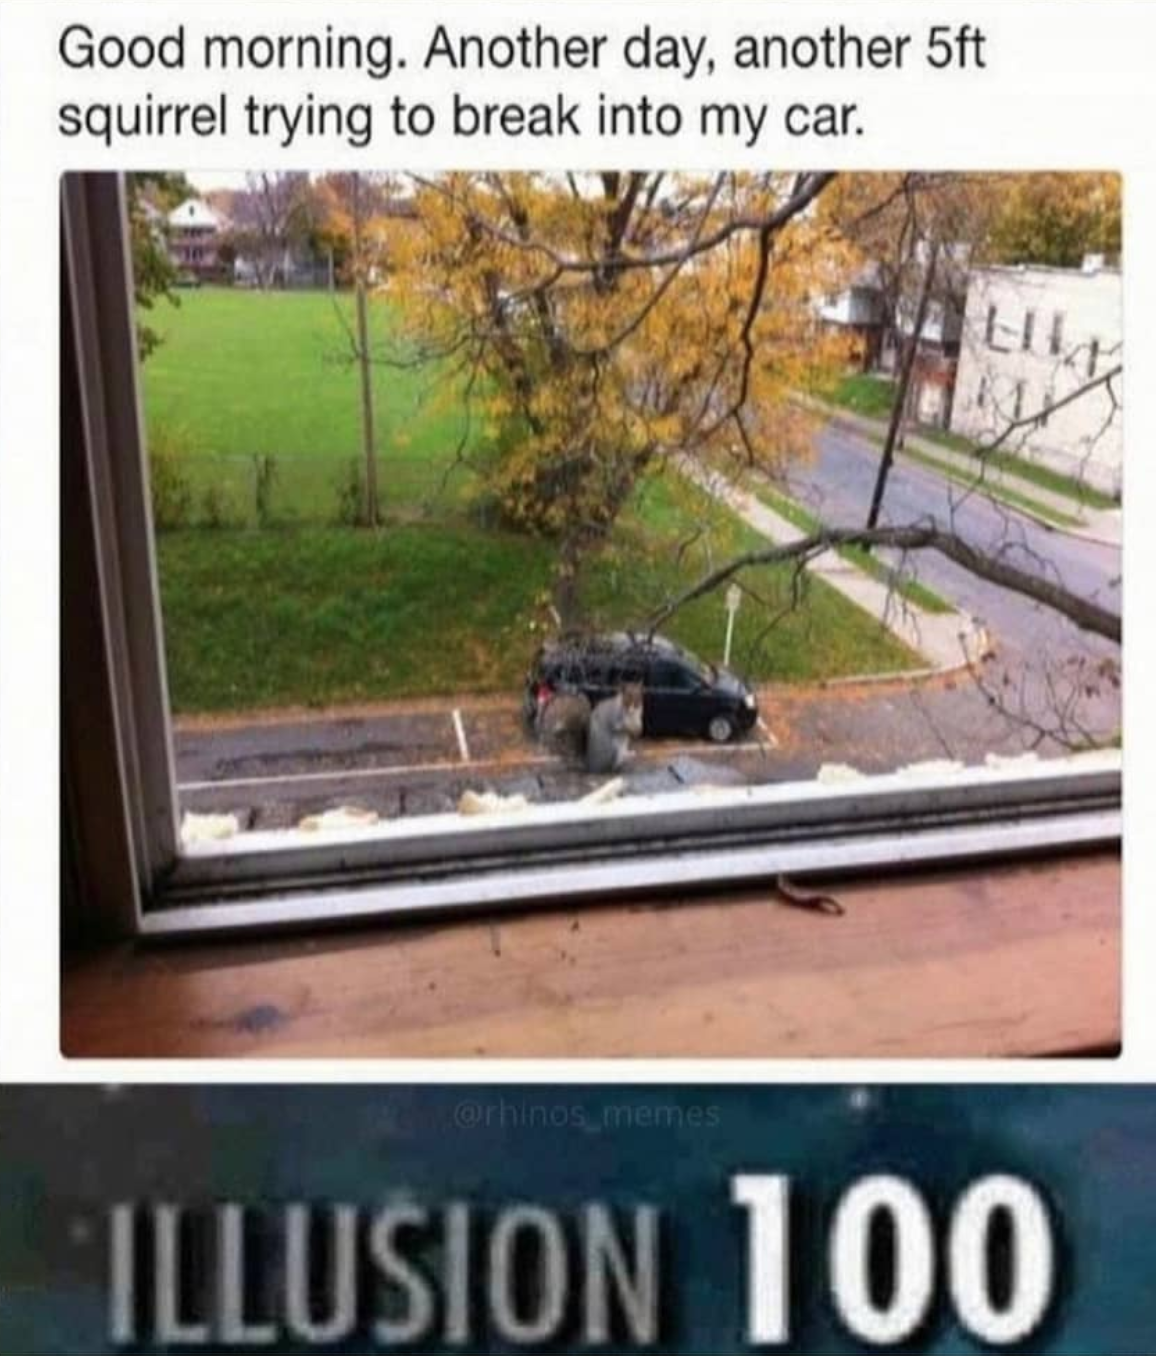 funny gaming memes - grass - Good morning. Another day, another 5ft squirrel trying to break into my car. Illusion 100